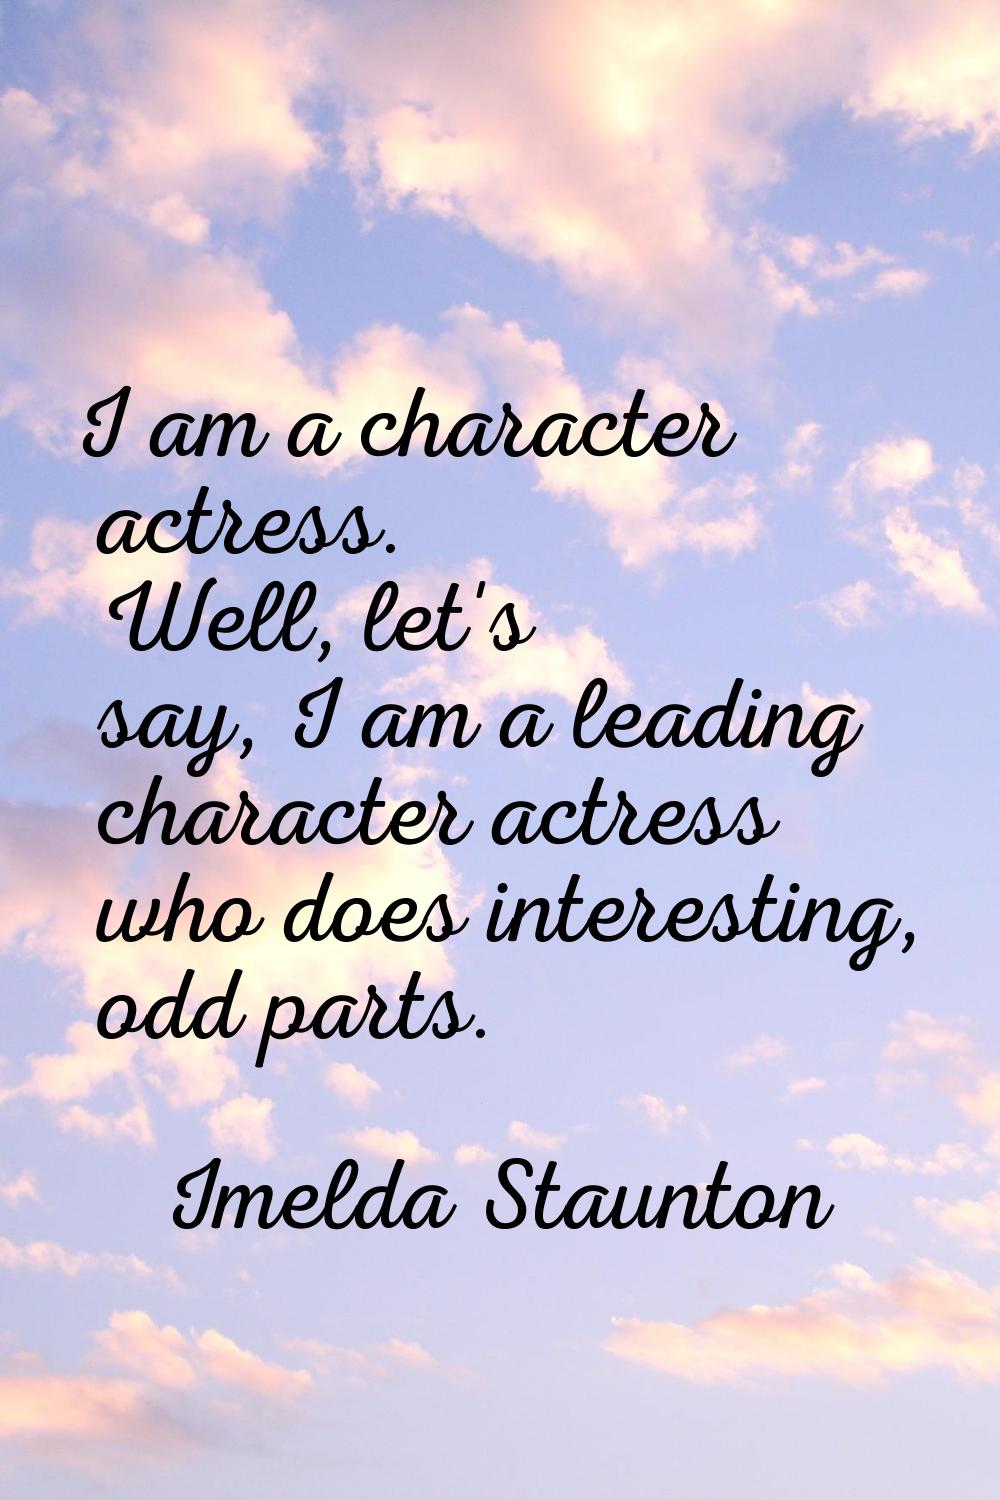 I am a character actress. Well, let's say, I am a leading character actress who does interesting, o